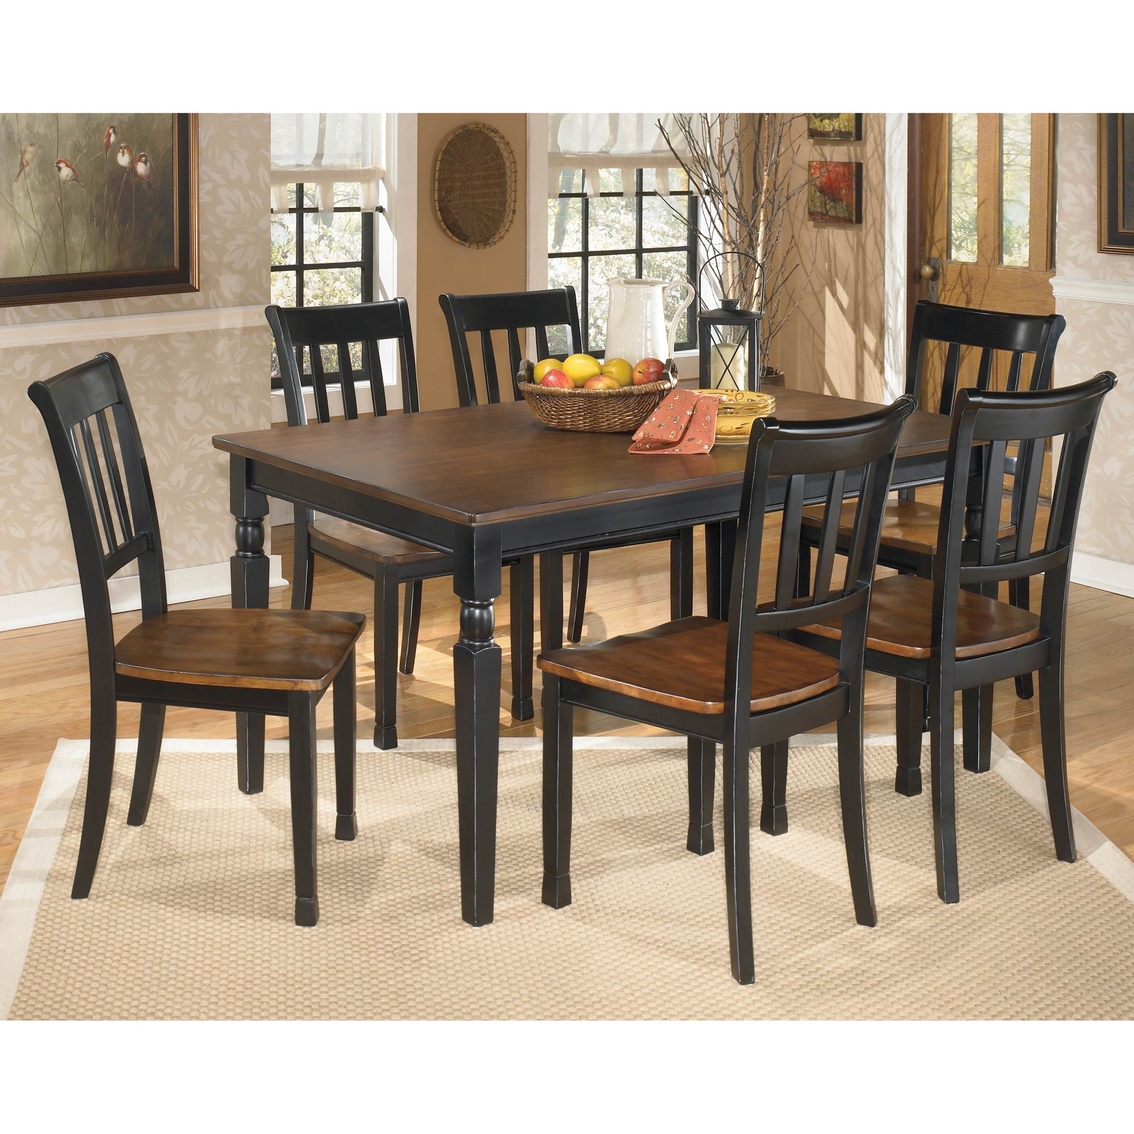 Signature Design by Ashley Owingsville Rectangular Dining Table - Image 2 of 3